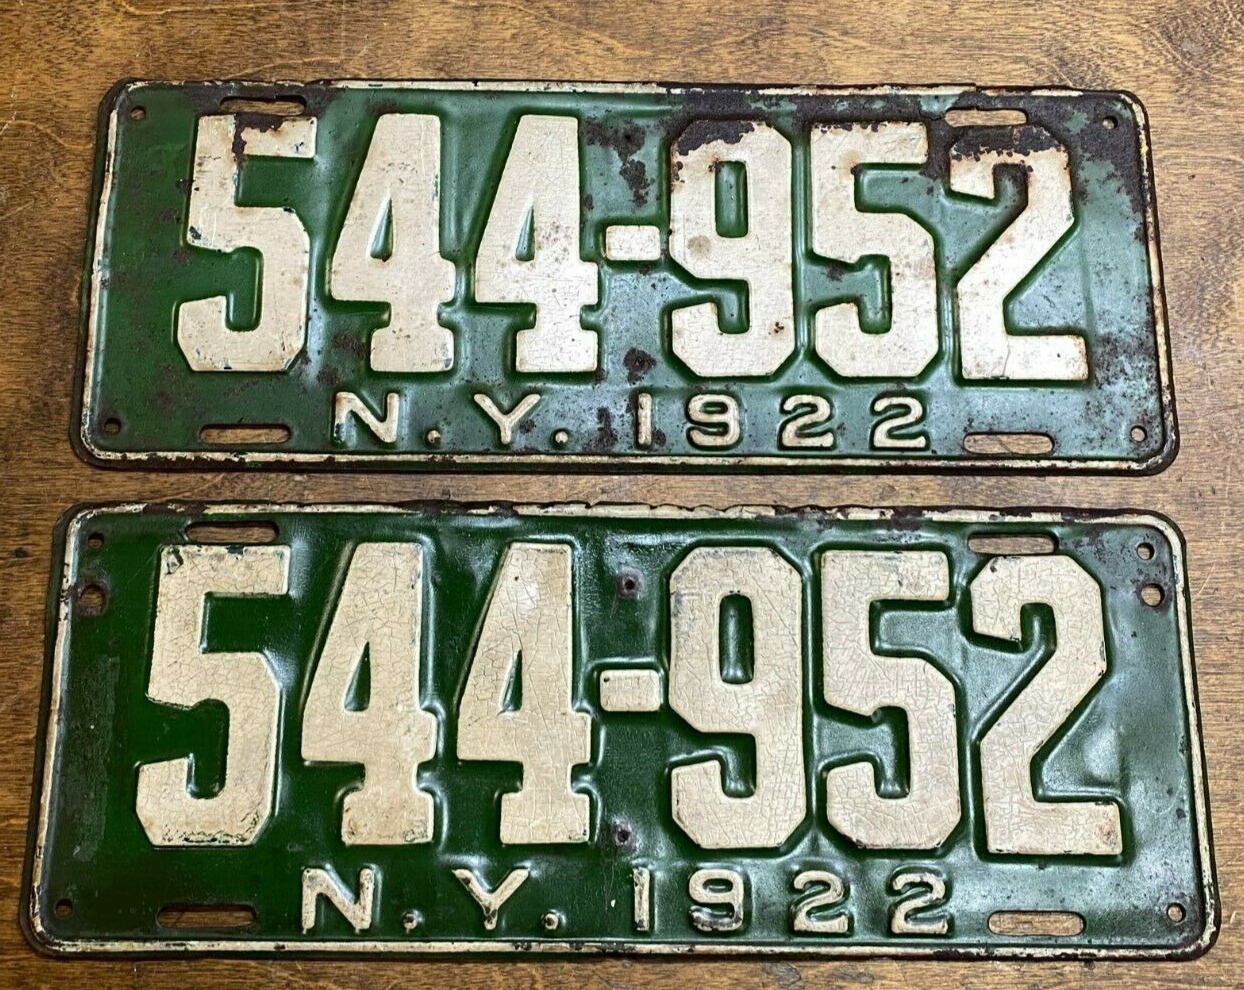 Pair of Antique 1922 NEW YORK Automobile License Plate / Vintage Car Tags